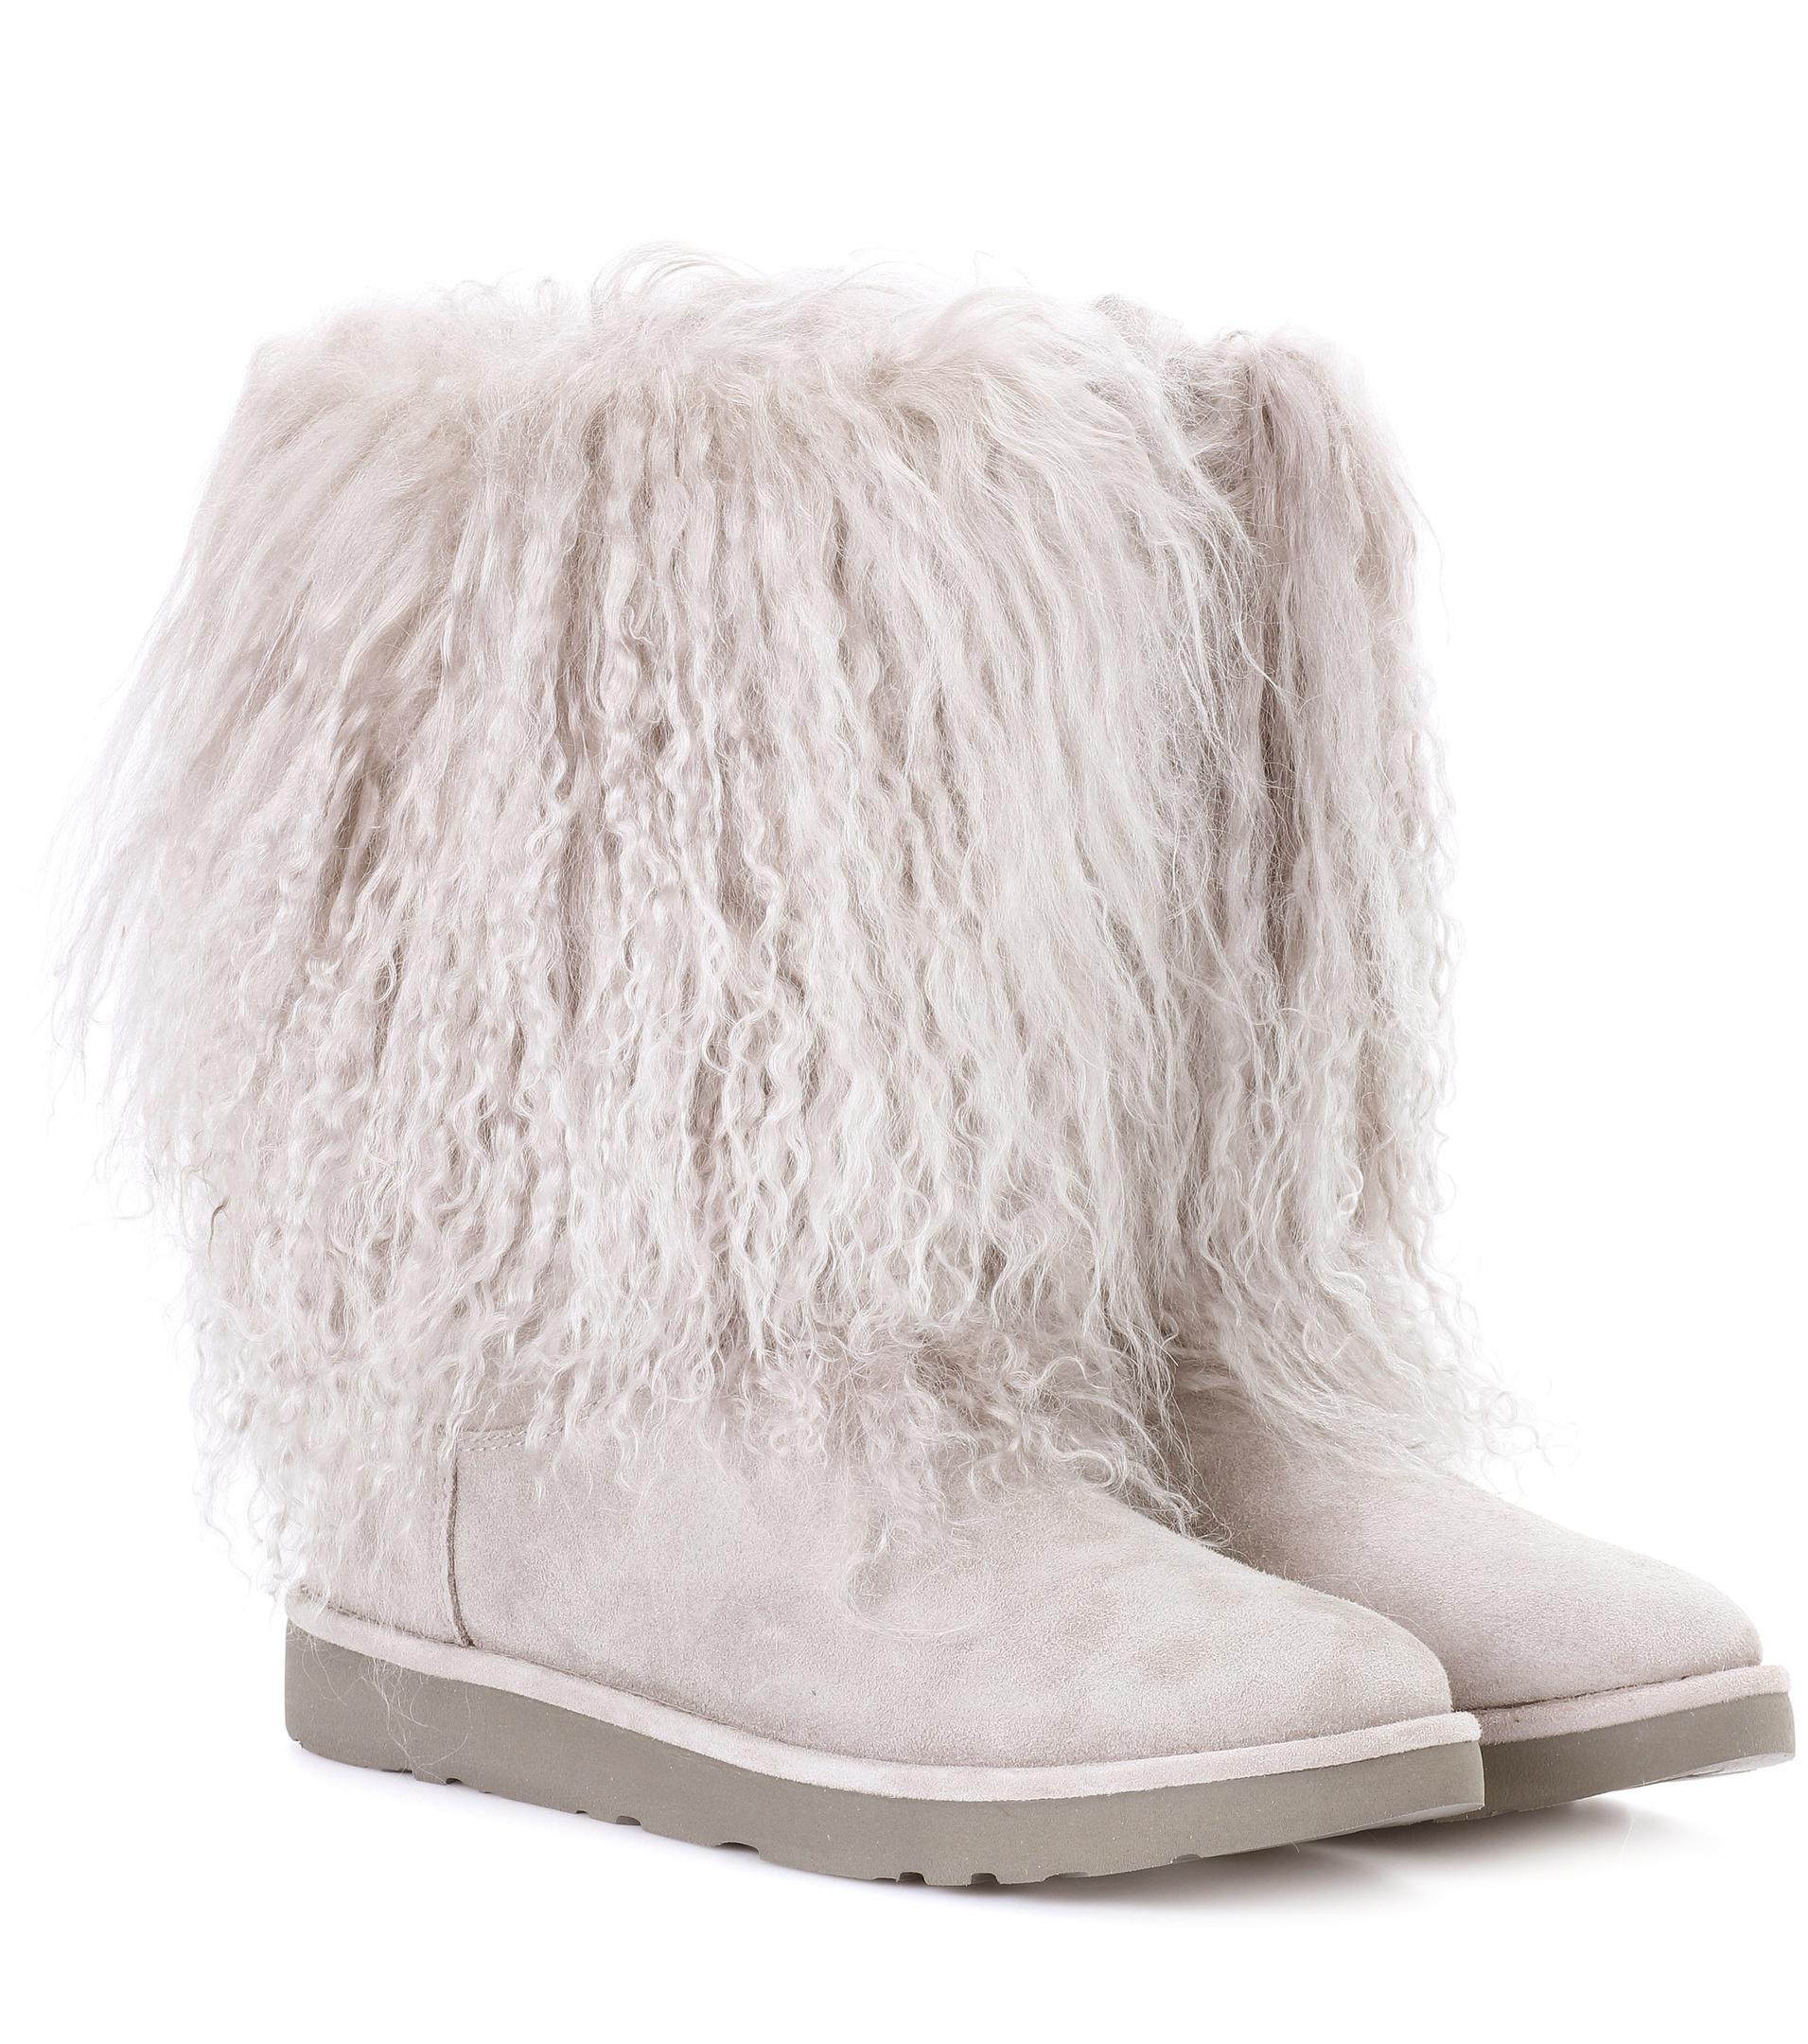 Lyst - Ugg Lida Fur And Suede Ankle Boots in Gray